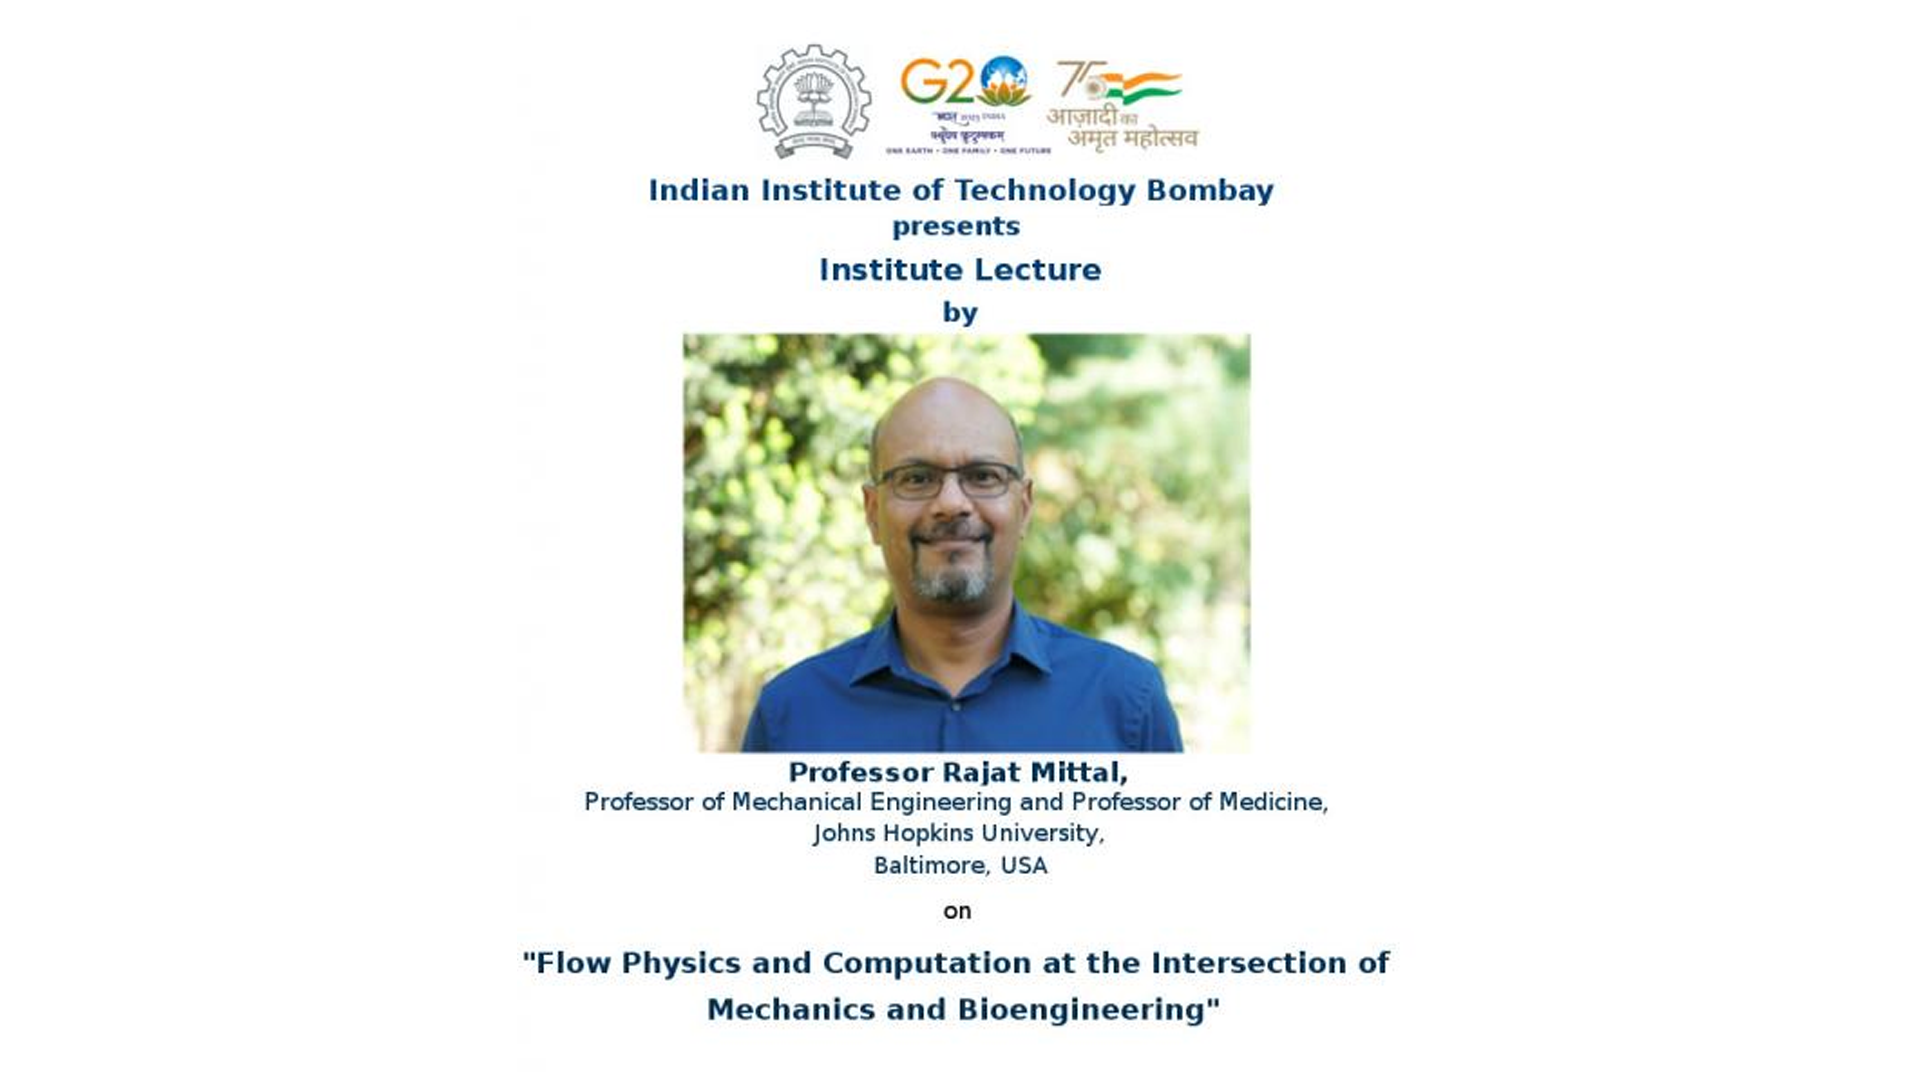 Institute Lecture on “Flow Physics and Computation at the Intersection of Mechanics and Bioengineering”